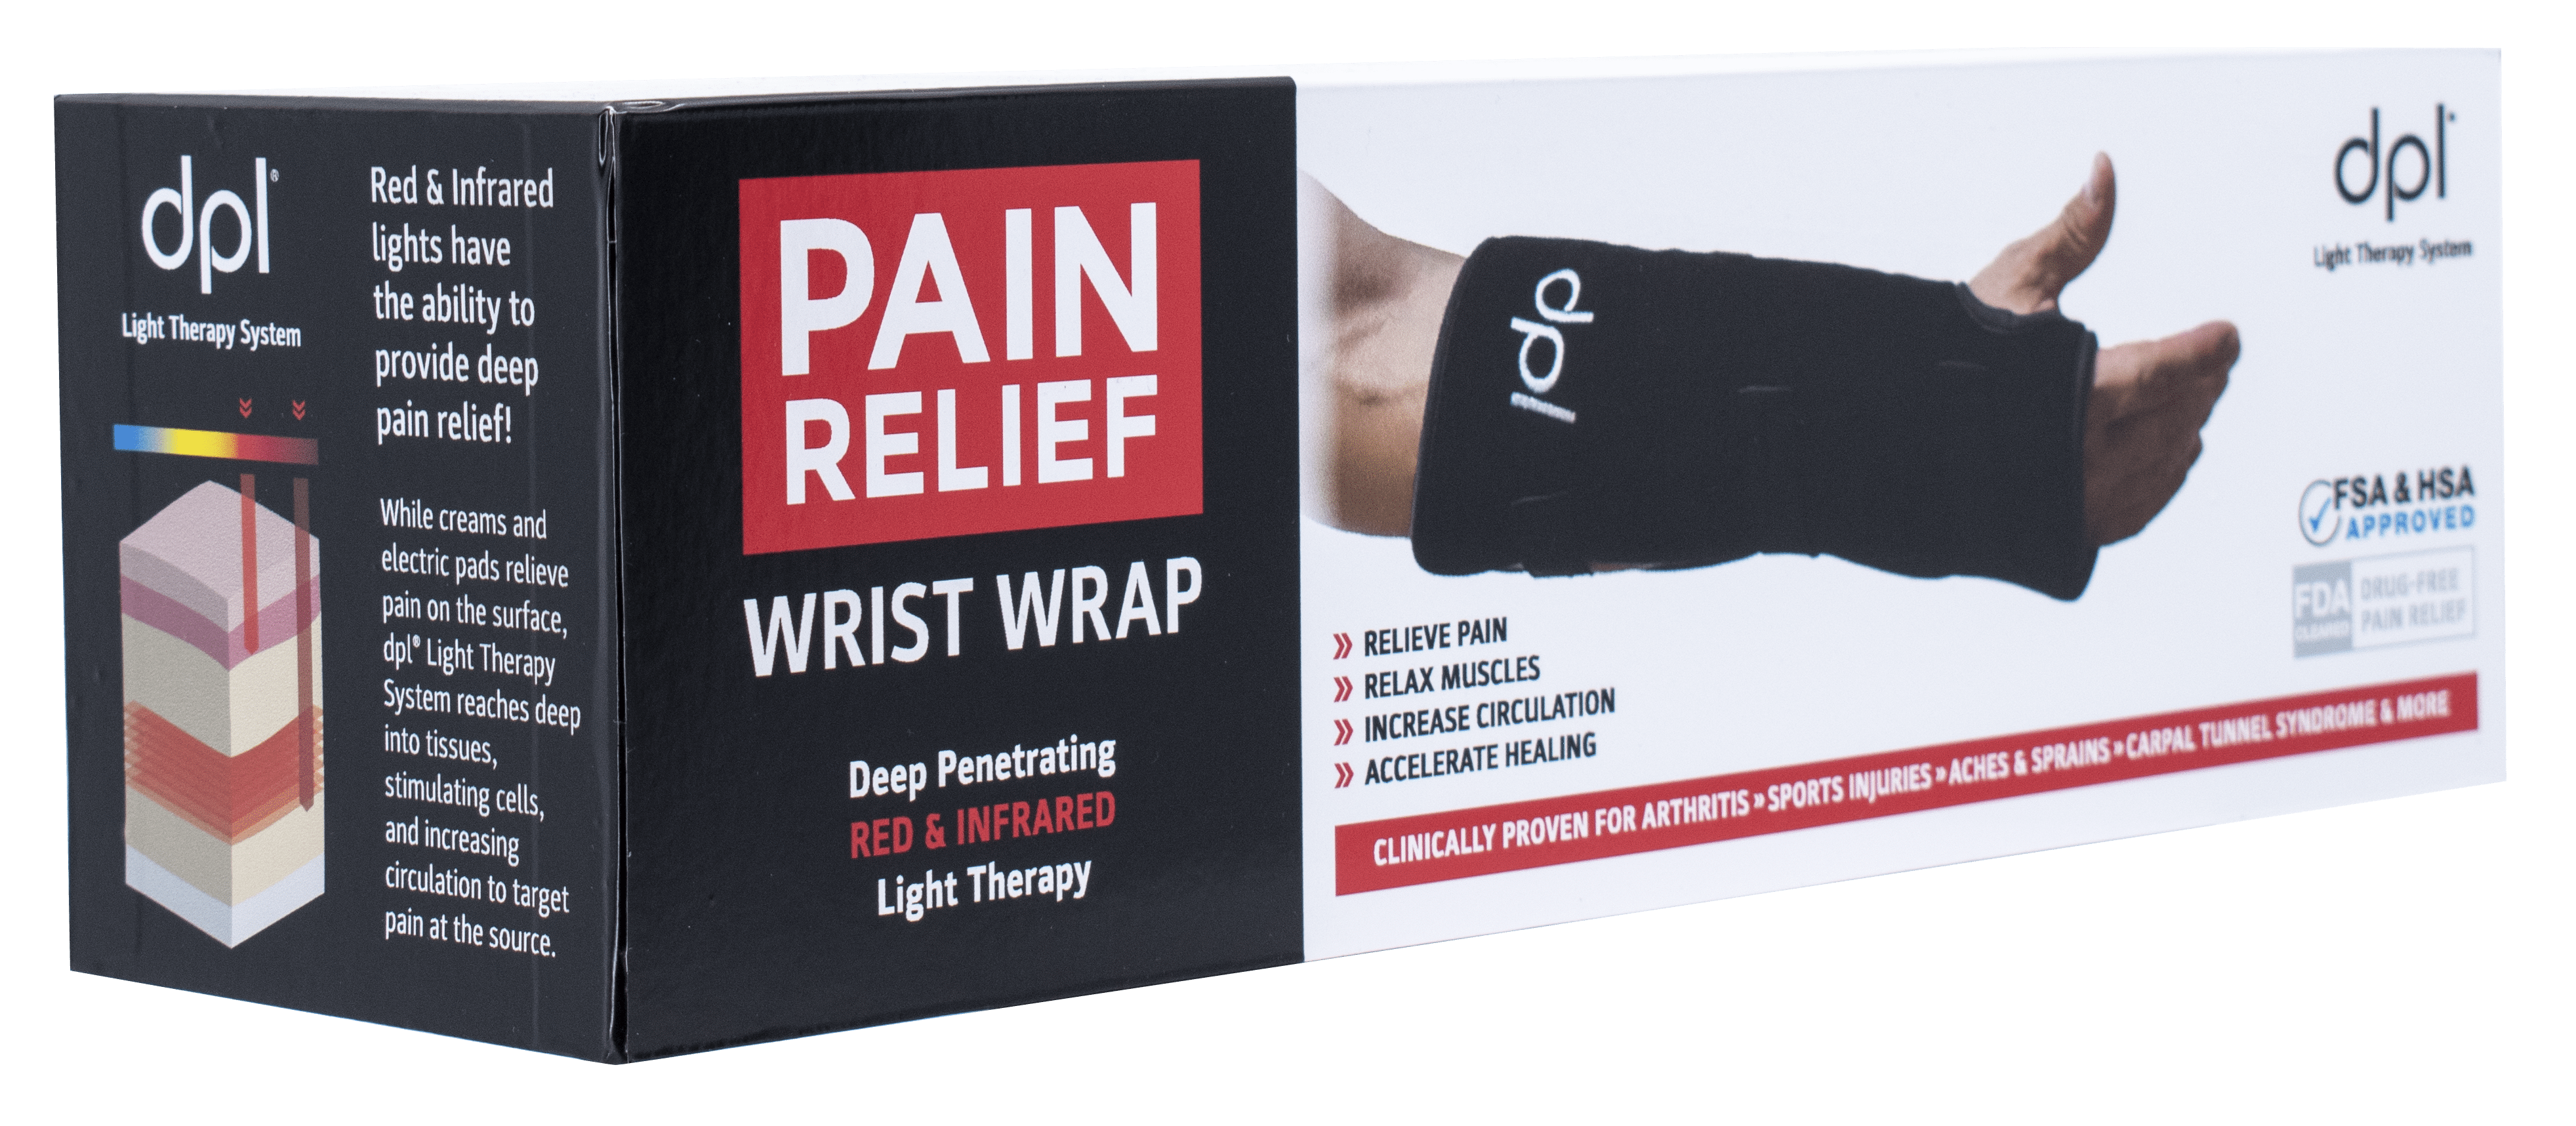 DPL Red Light Therapy Wrist Wrap - Carex Health Brands